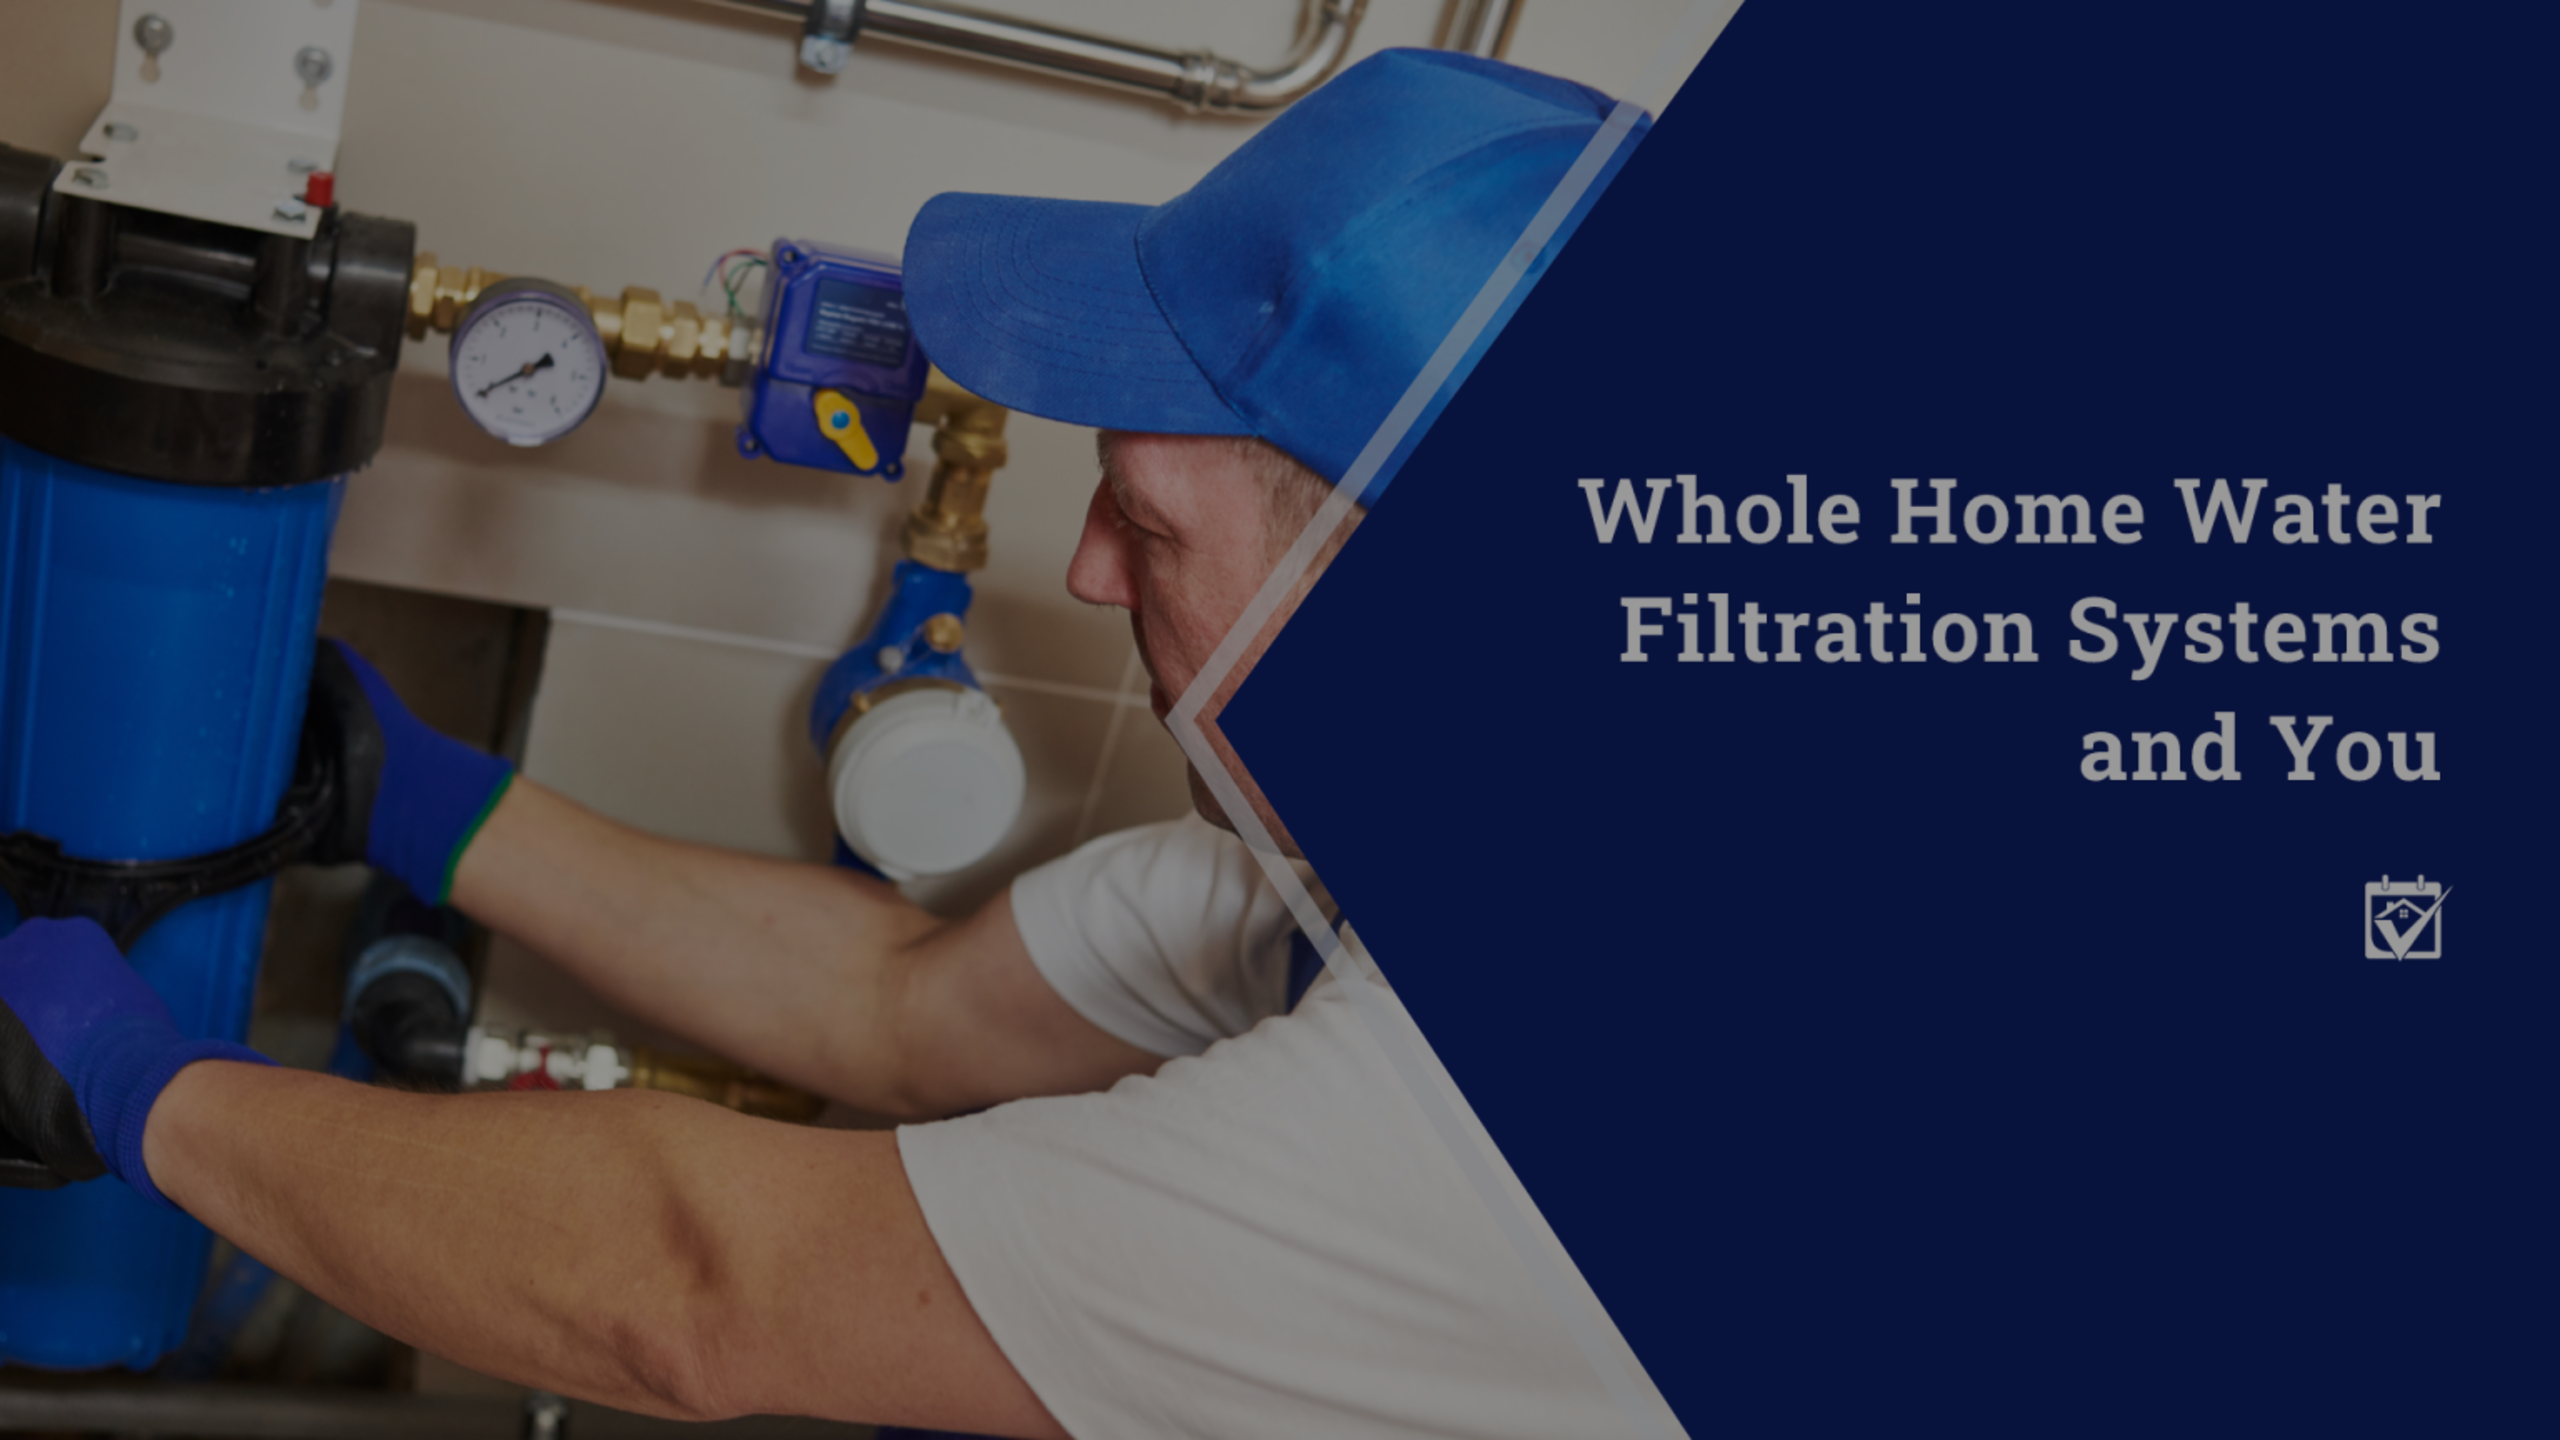 Whole Home Water Filtration Systems and You